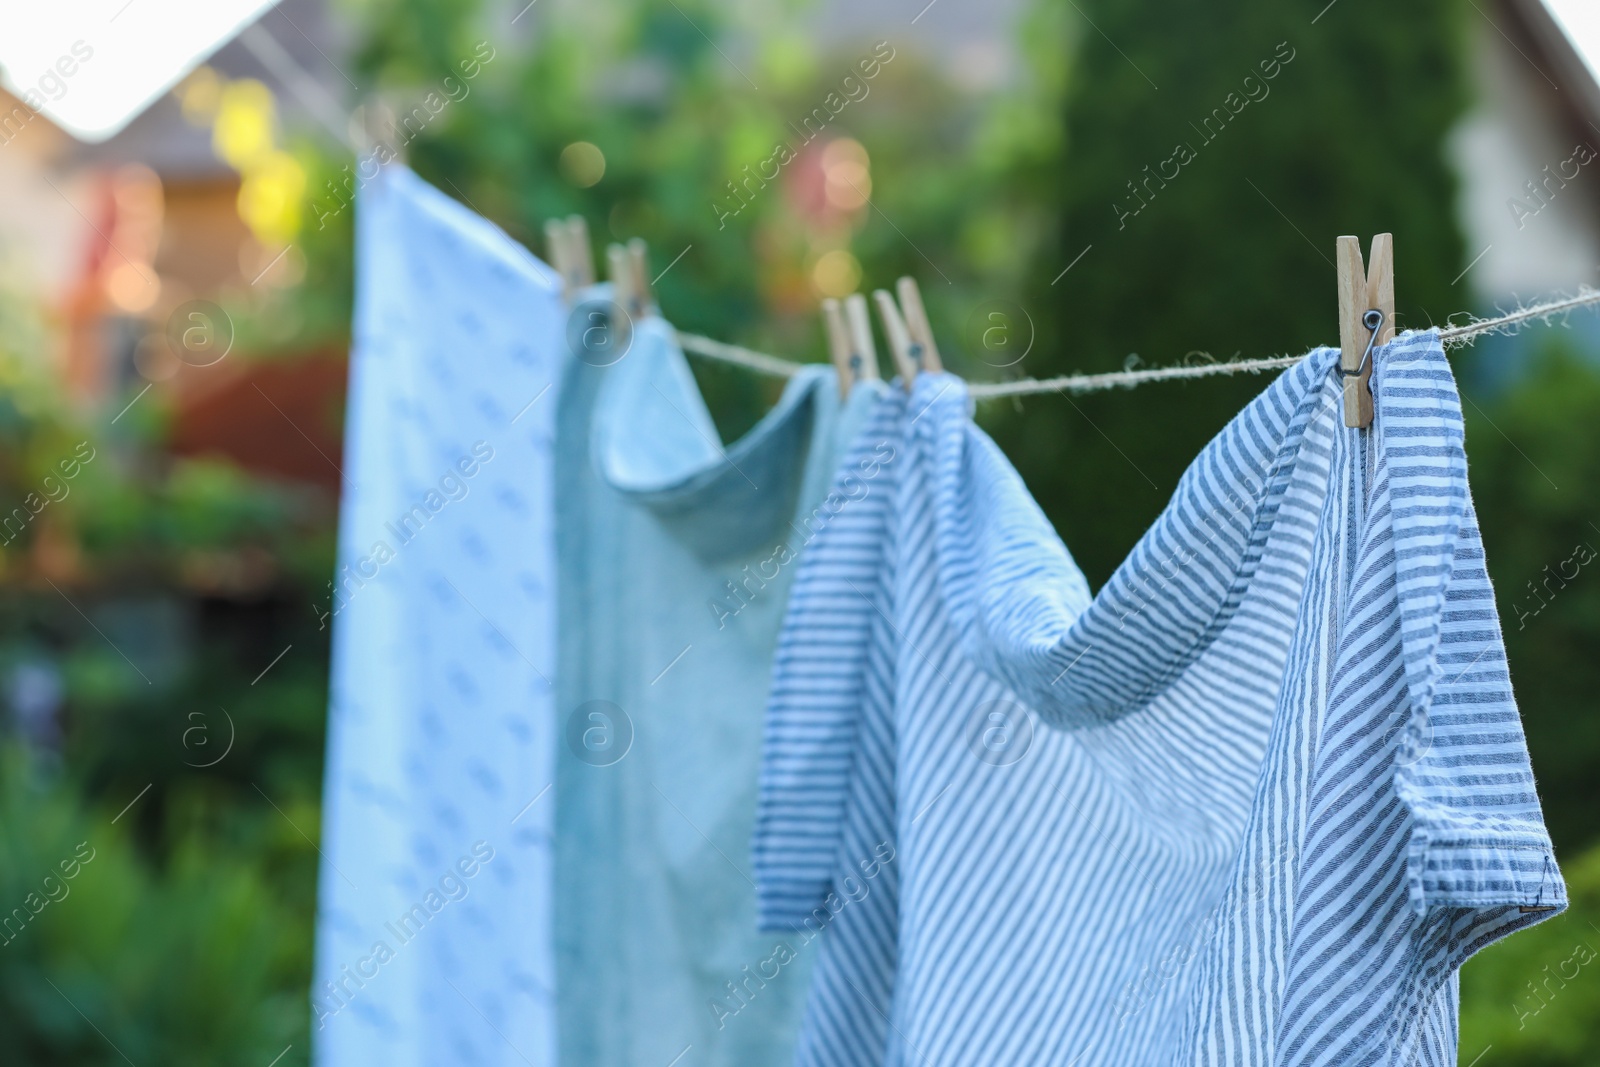 Photo of Washing line with drying shirts against blurred background, closeup